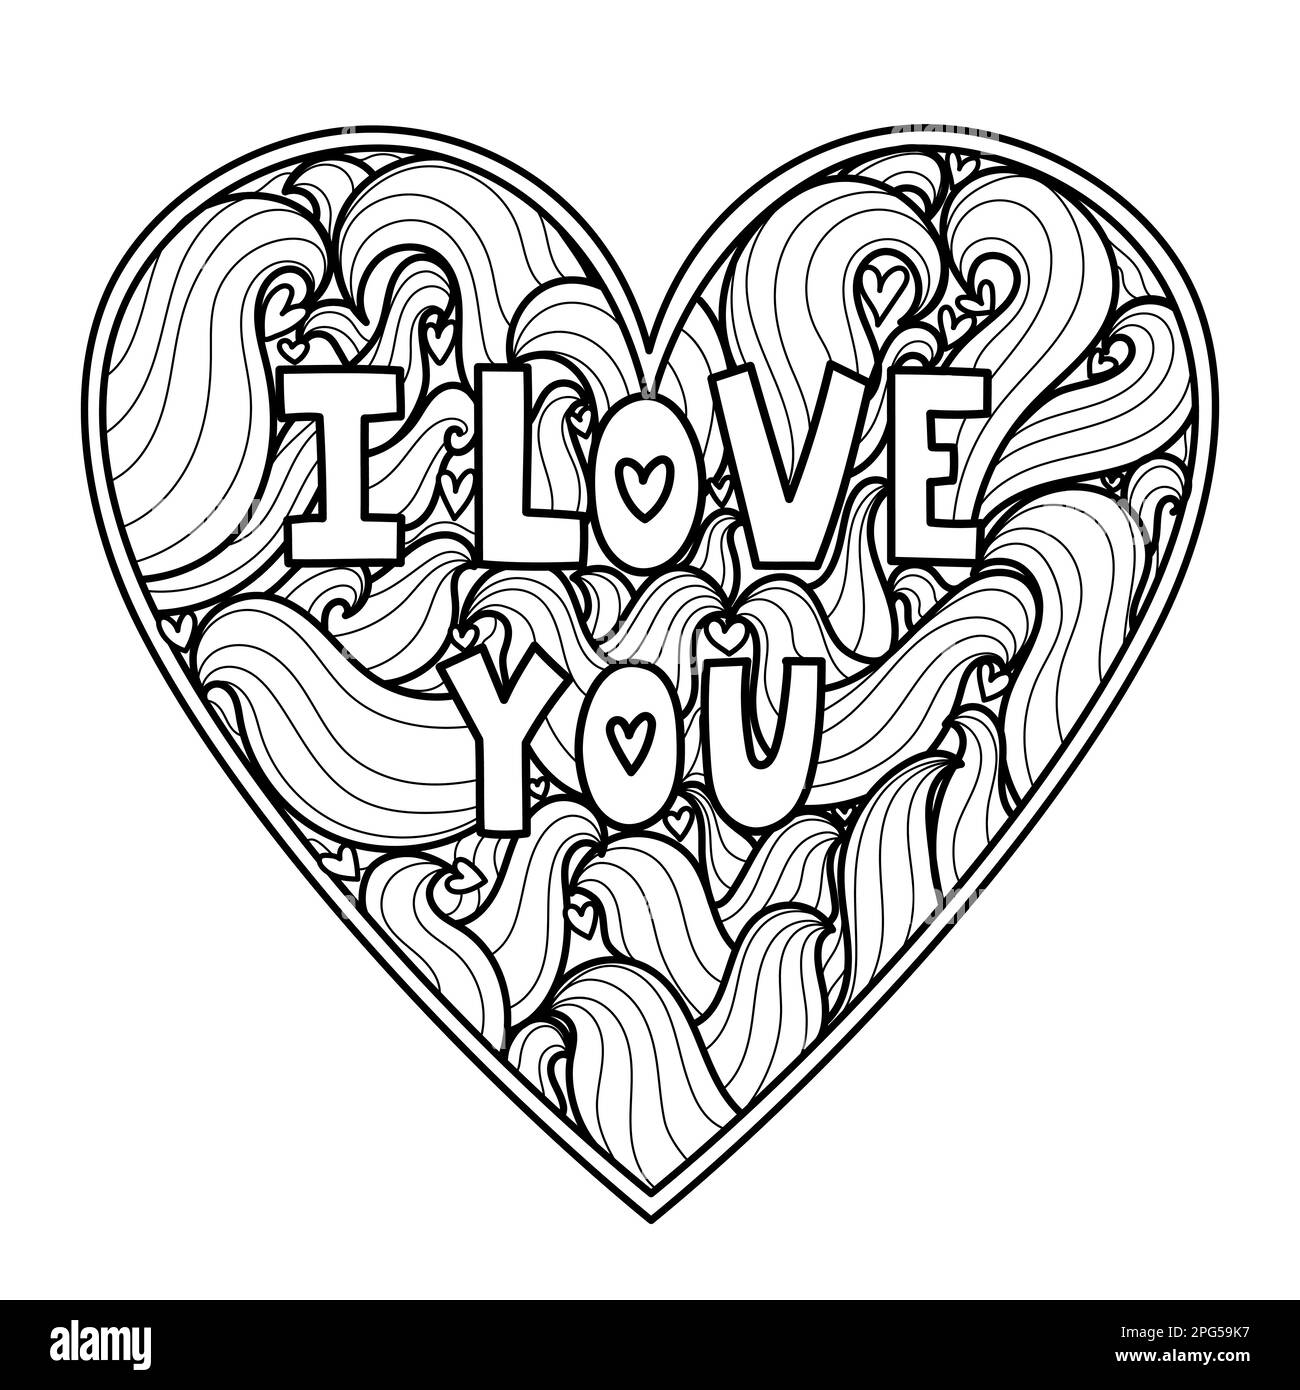 I love you doodle heart coloring page black and white valentines day pattern for coloring book stock vector image art